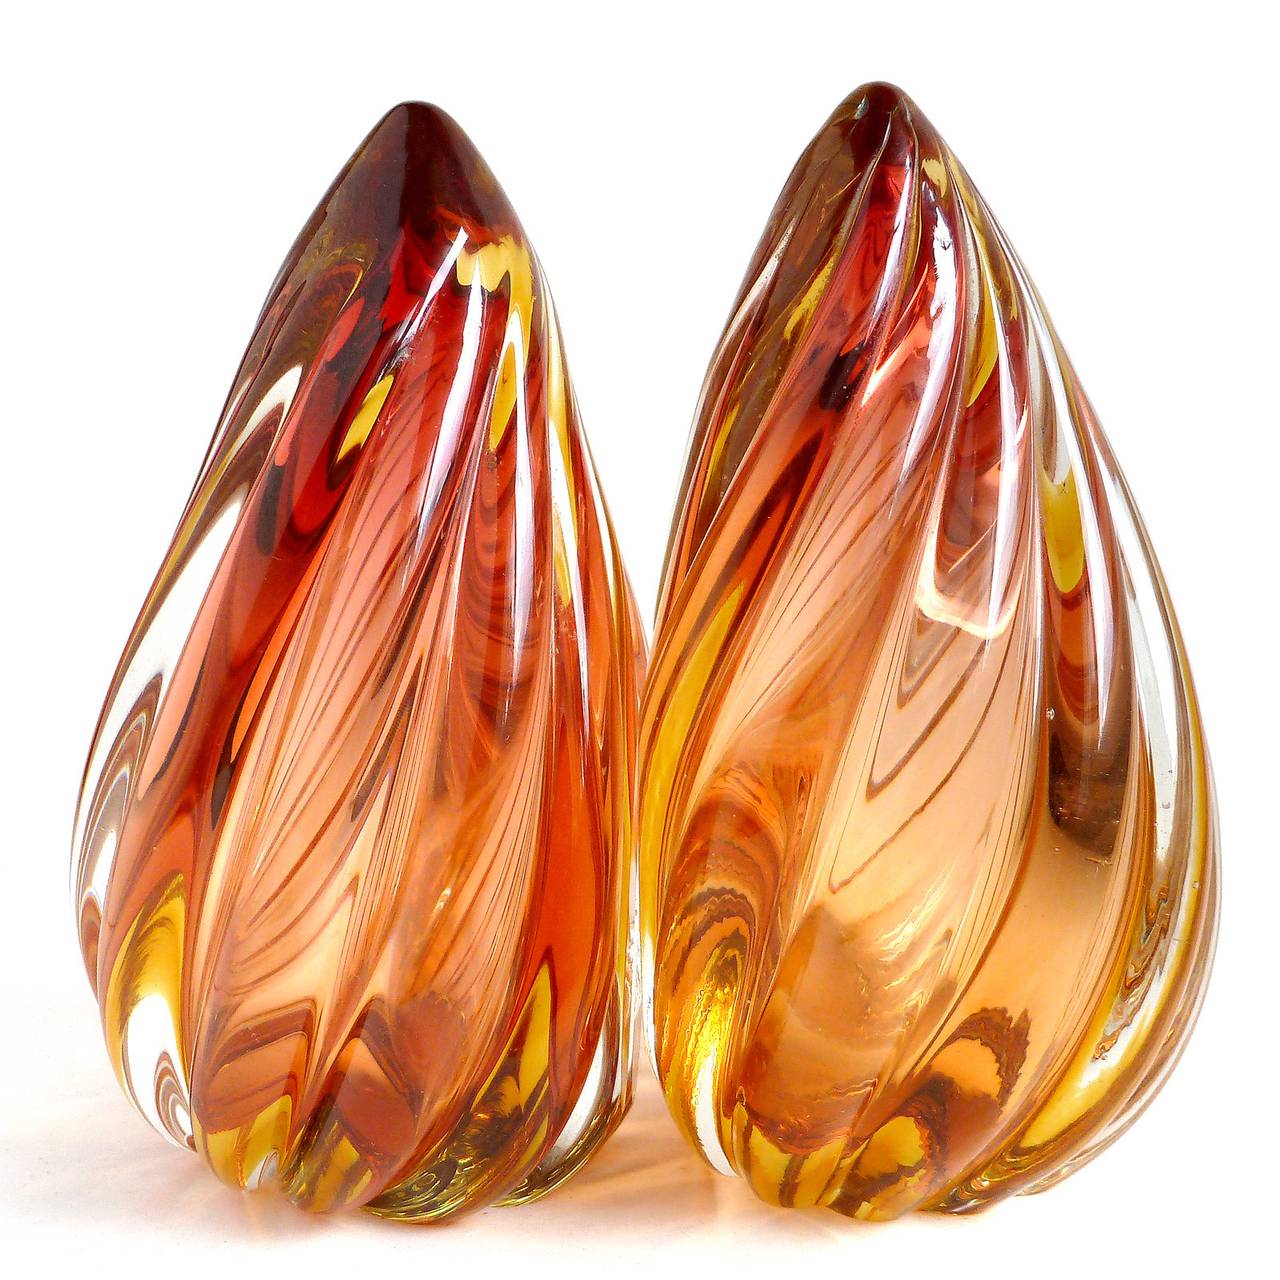 FREE Shipping Worldwide! See details below description.

Wonderful Murano handblown cranberry and orange Sommerso art glass twisting flame bookends. Documented to designer Alfredo Barbini, circa 1950-1960, and published in his catalog. Gorgeous